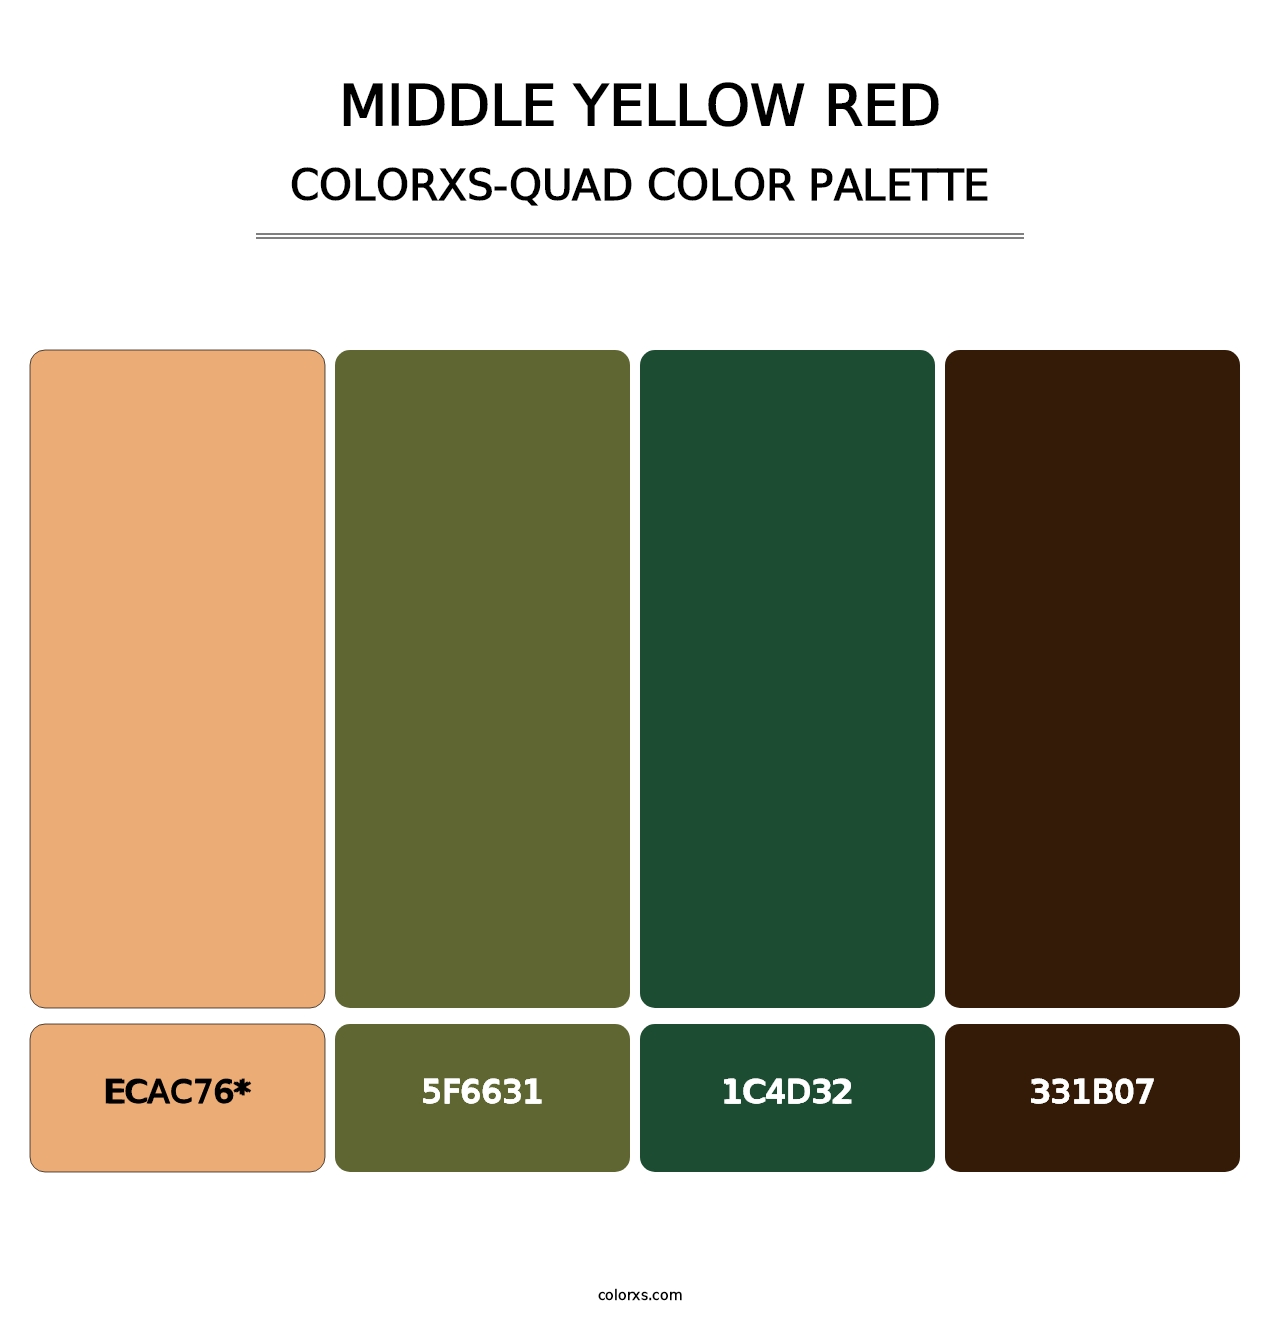 Middle Yellow Red - Colorxs Quad Palette